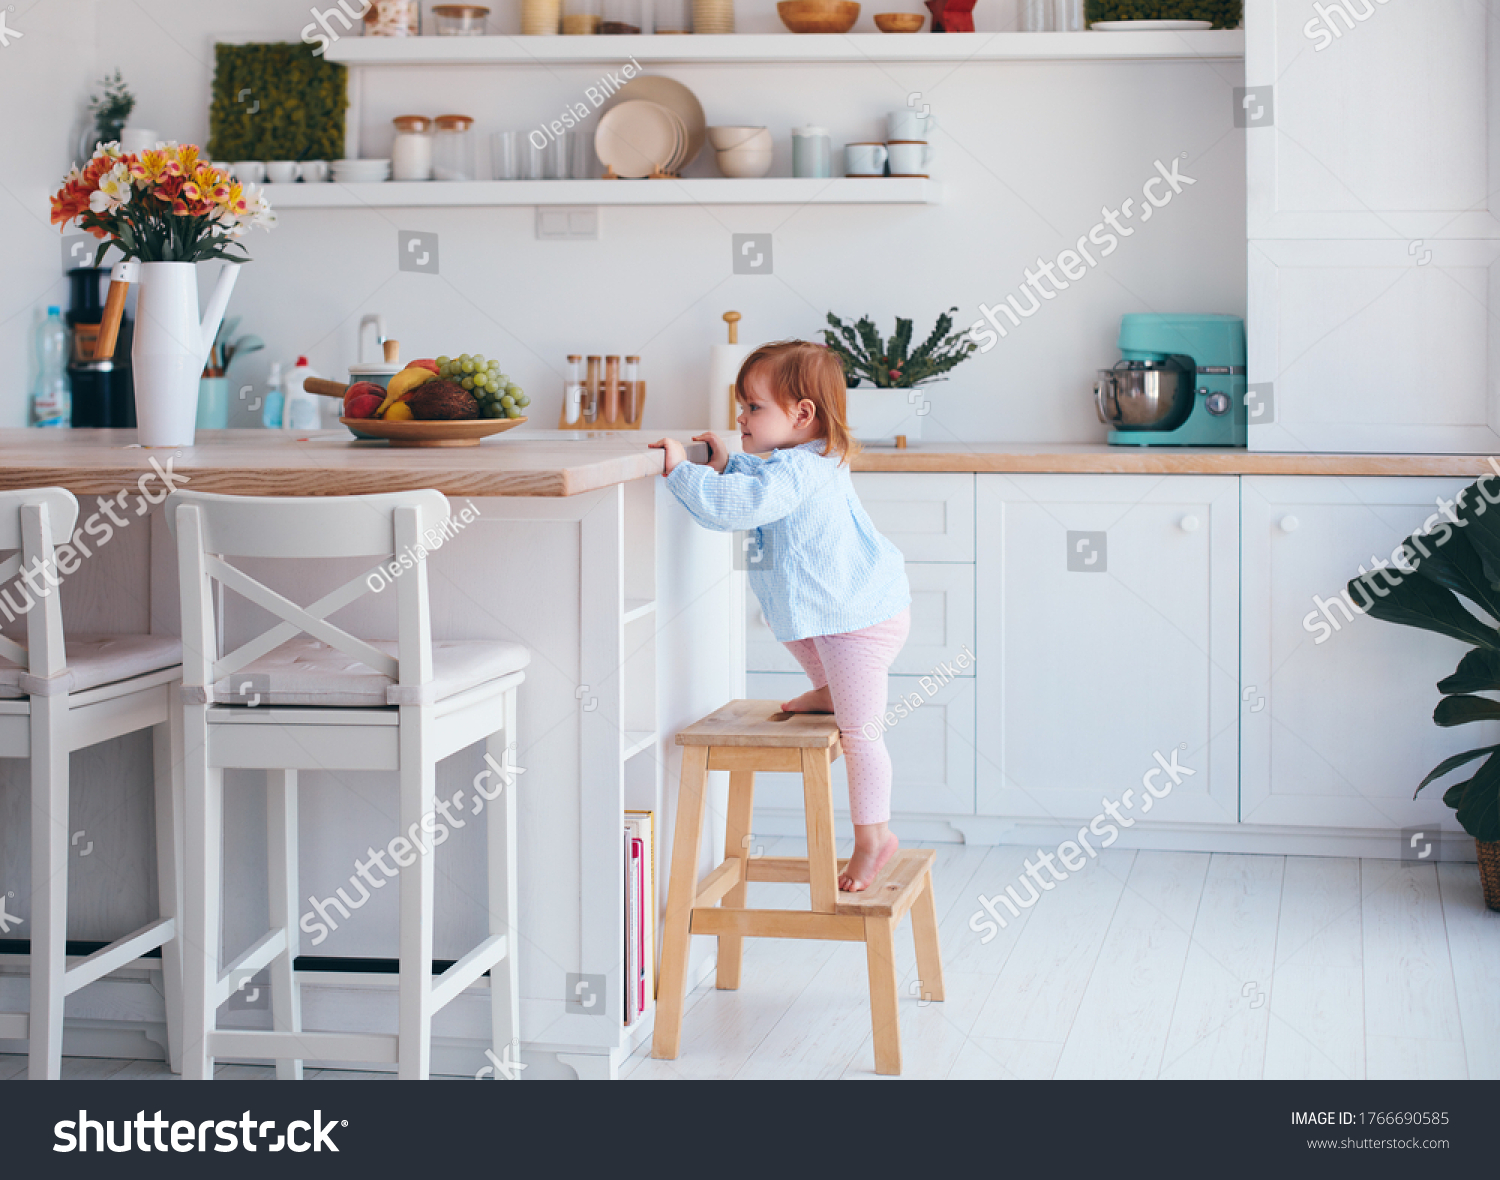 curious infant baby girl trying to reach things on the table in the kitchen with the help of step stool #1766690585